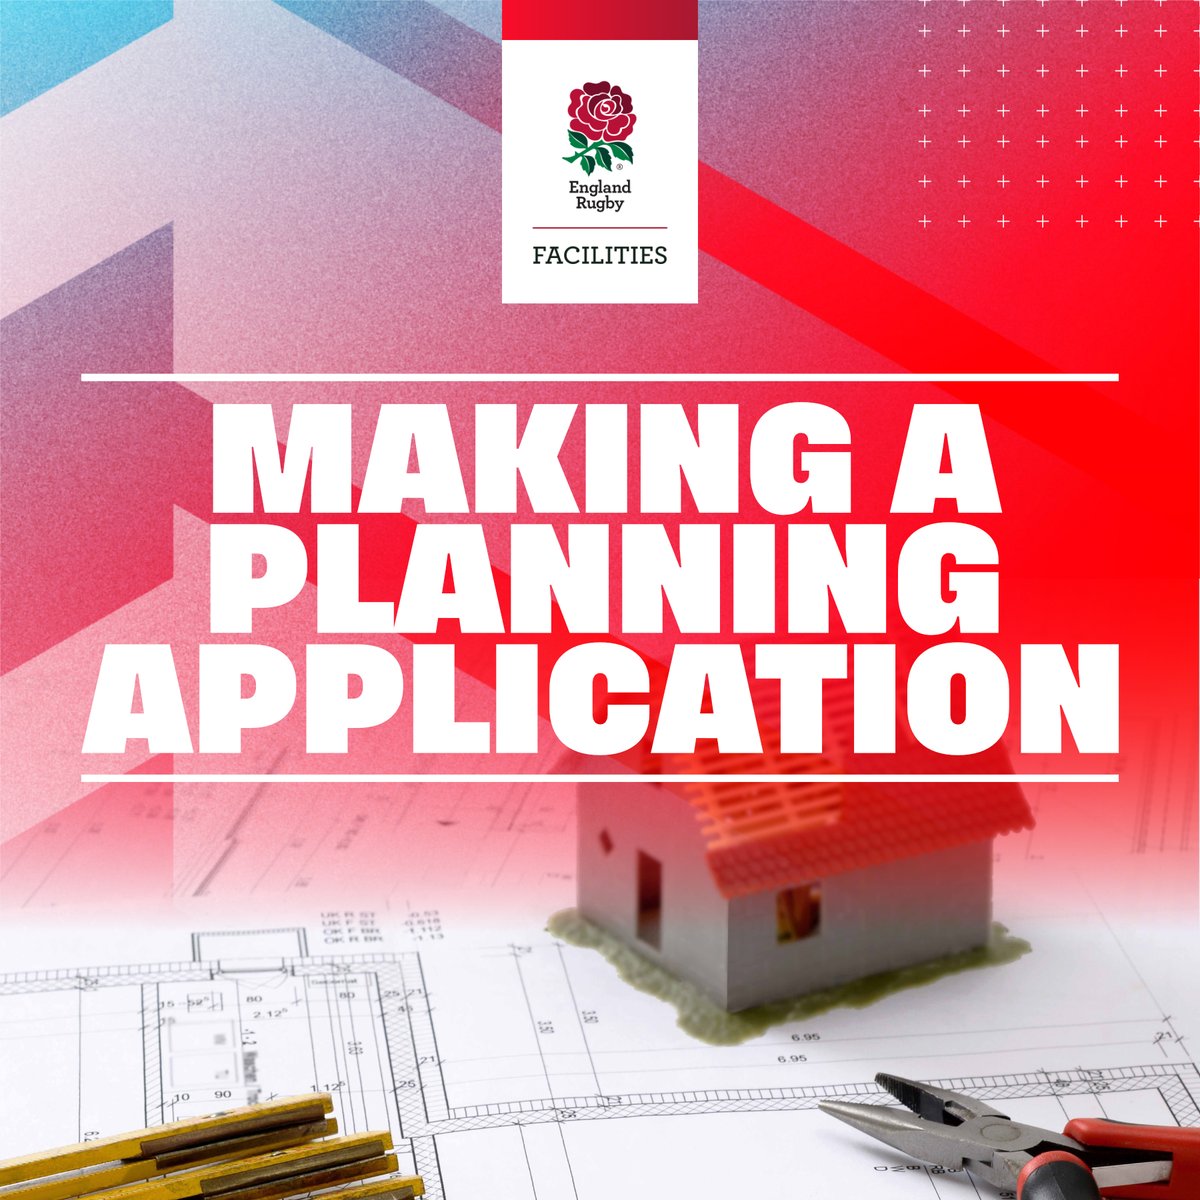 A helpful guide to making a planning application for sports clubs 🔗 tinyurl.com/ykp26x93